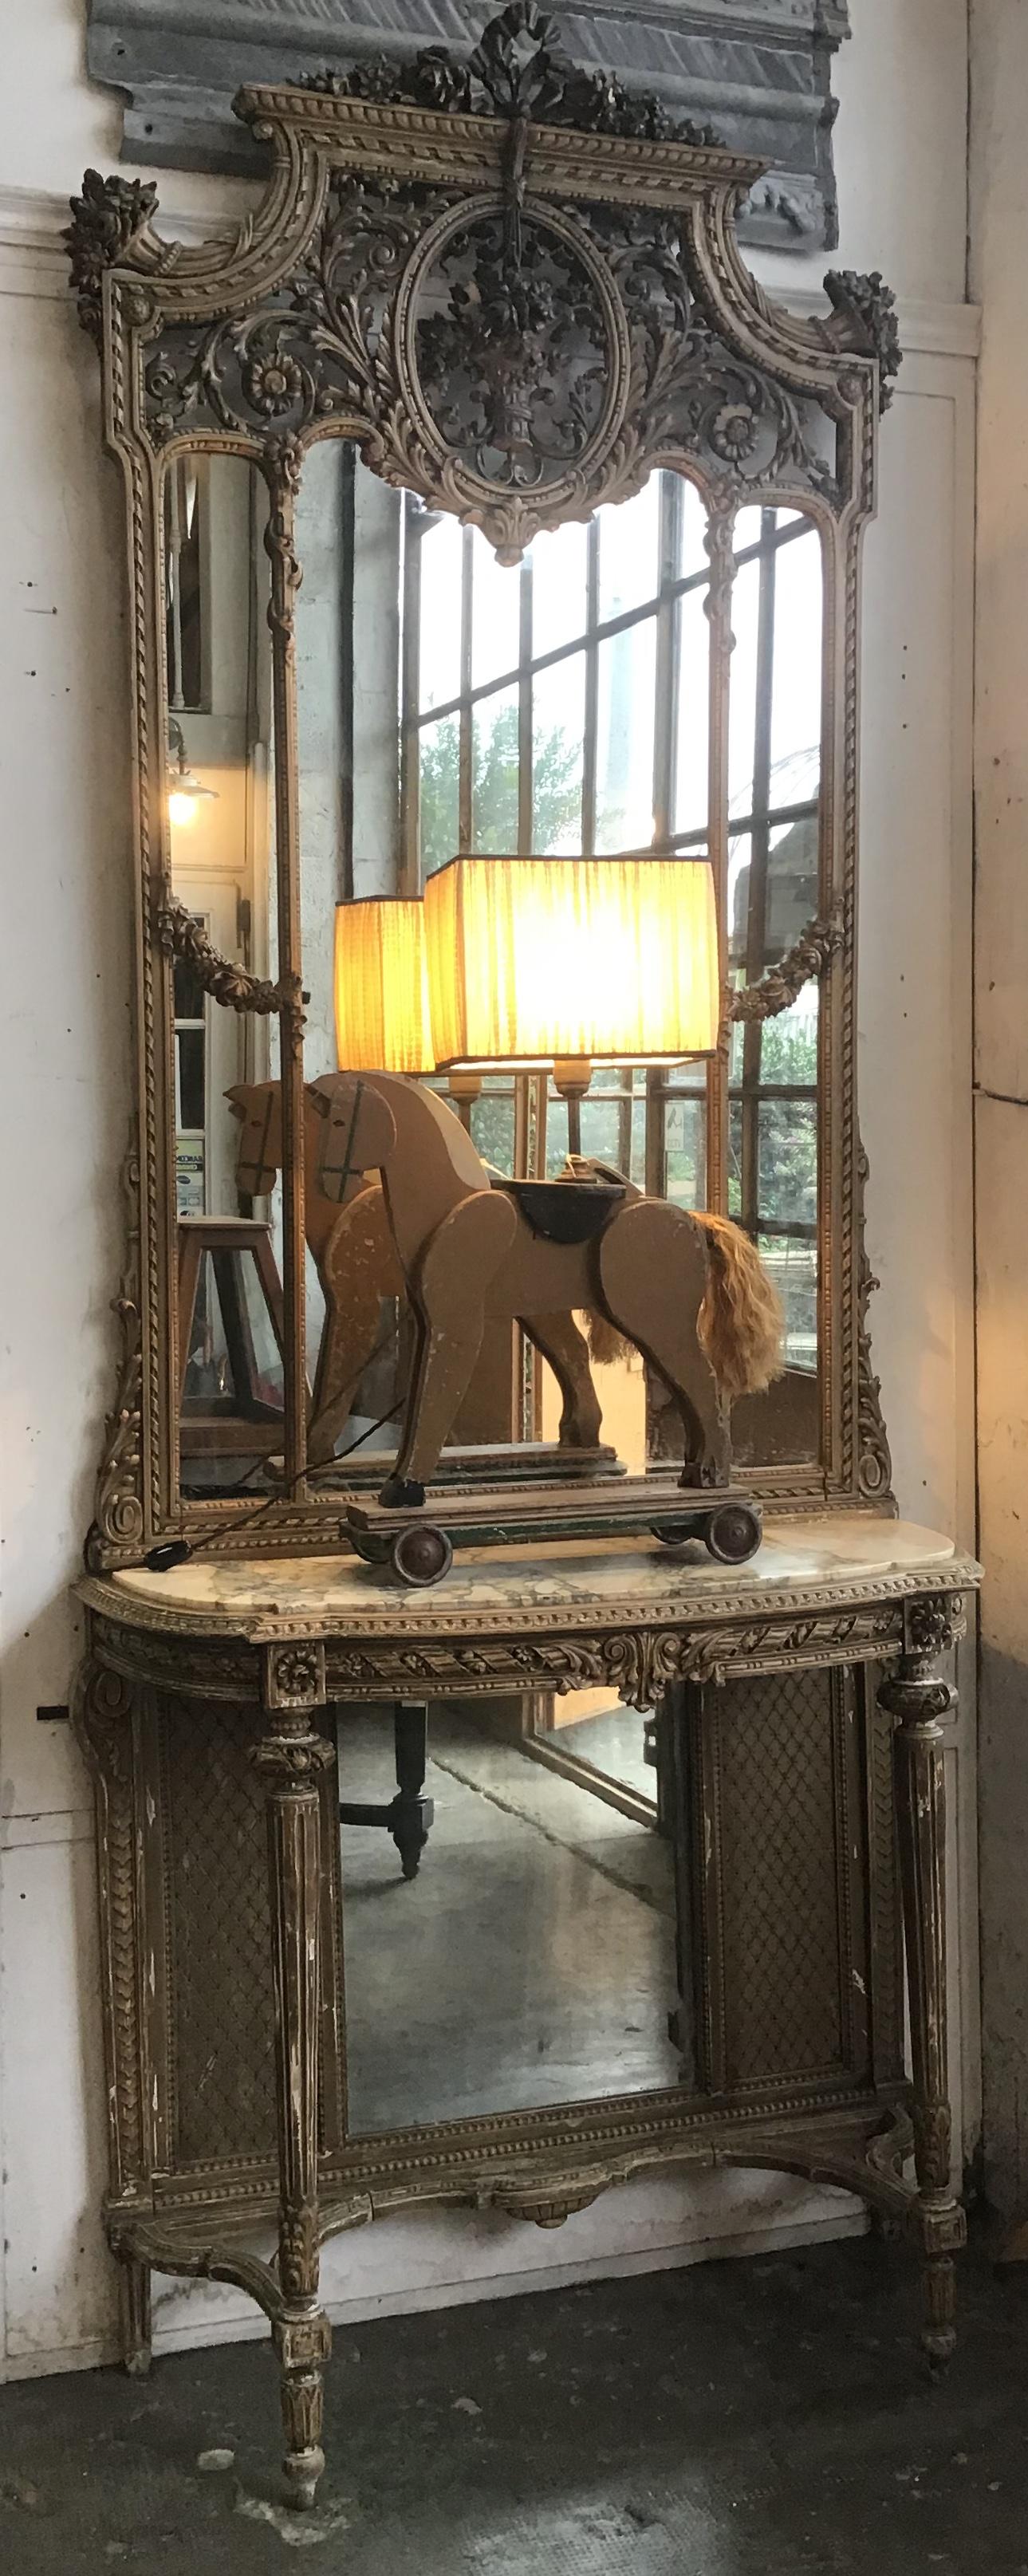 19th Century French Marble-Top Console with Giltwood Framed Mirror from 1890s (Französisch)